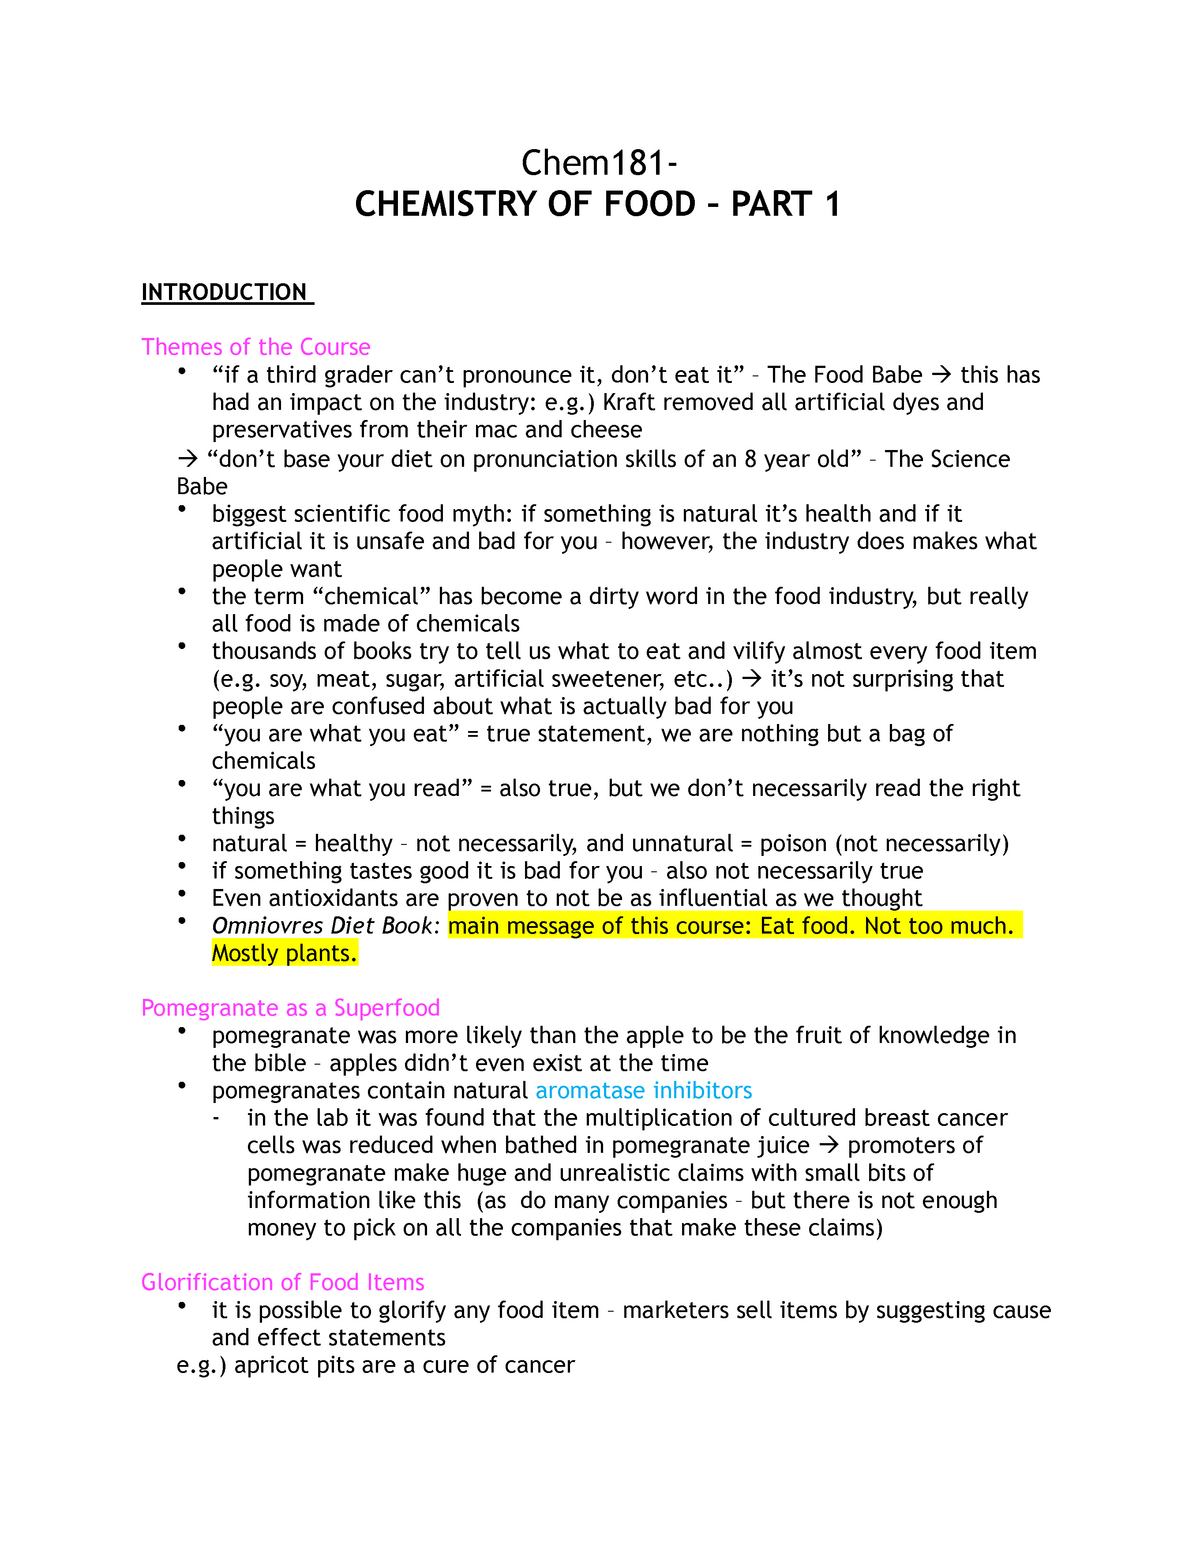 food chemistry research paper